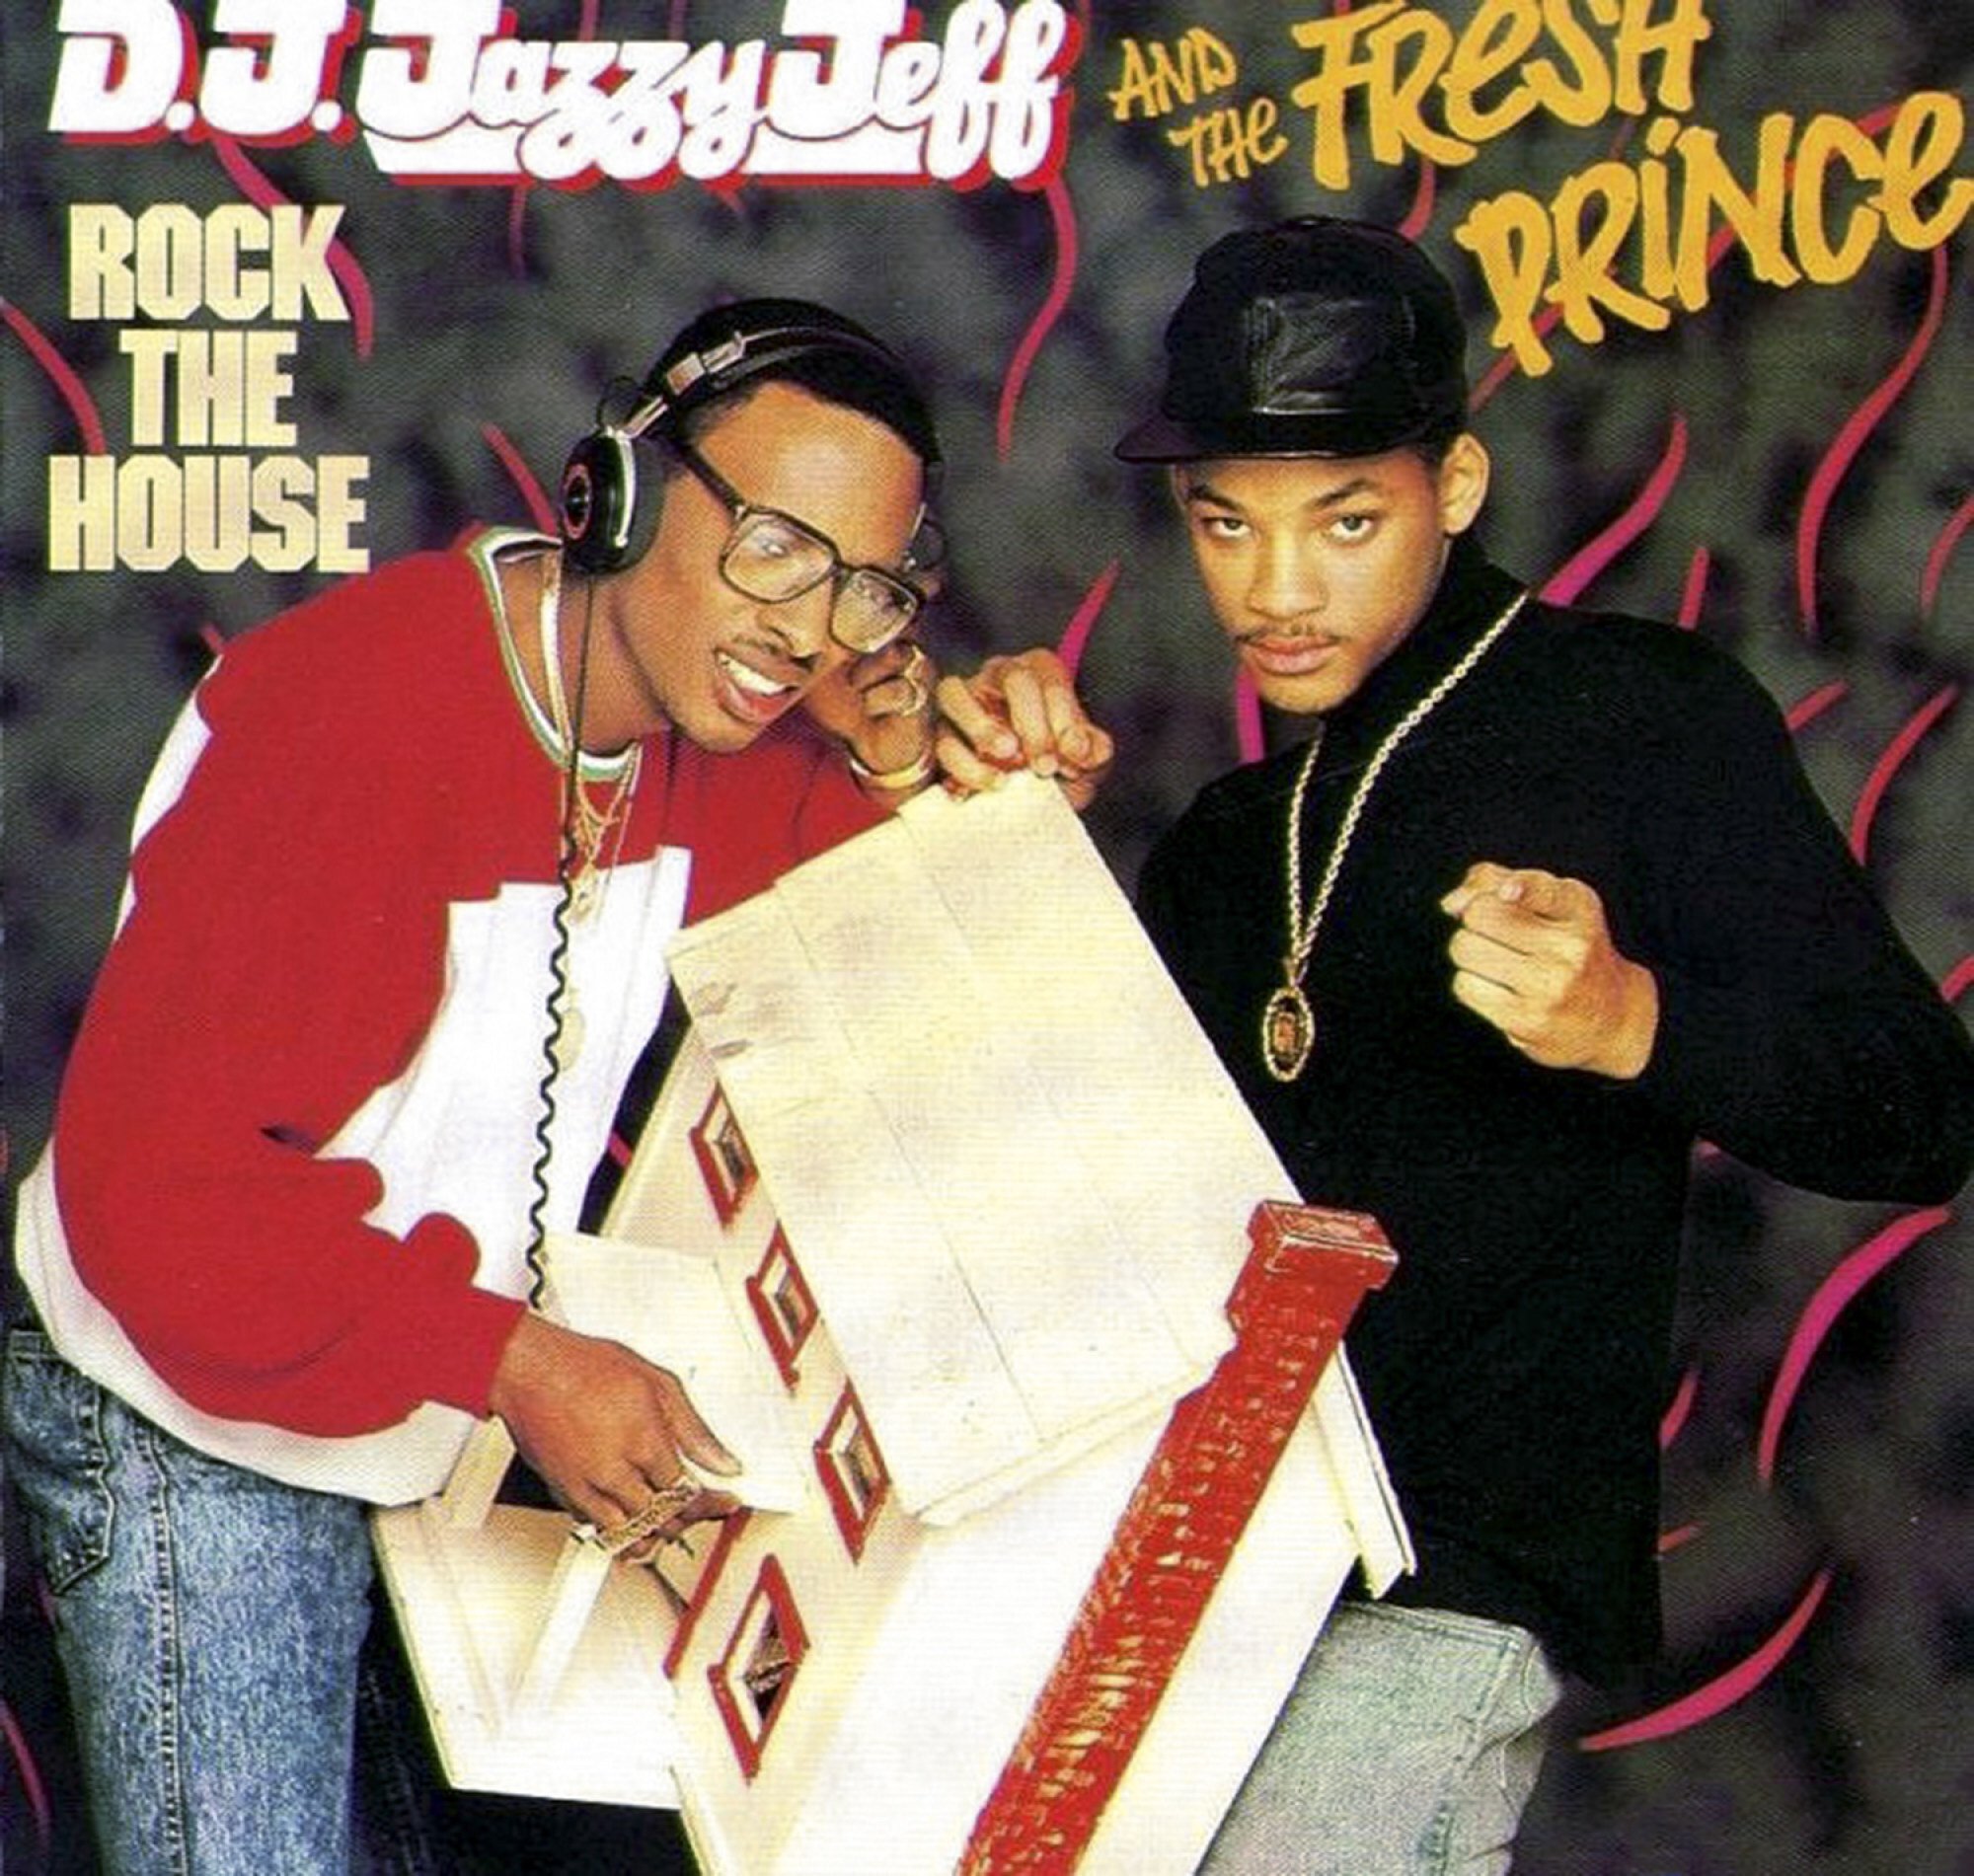 The cover of DJ Jazzy Jeff & The Fresh Prince’s 1987 album “Rock The House”. Photo: Handout